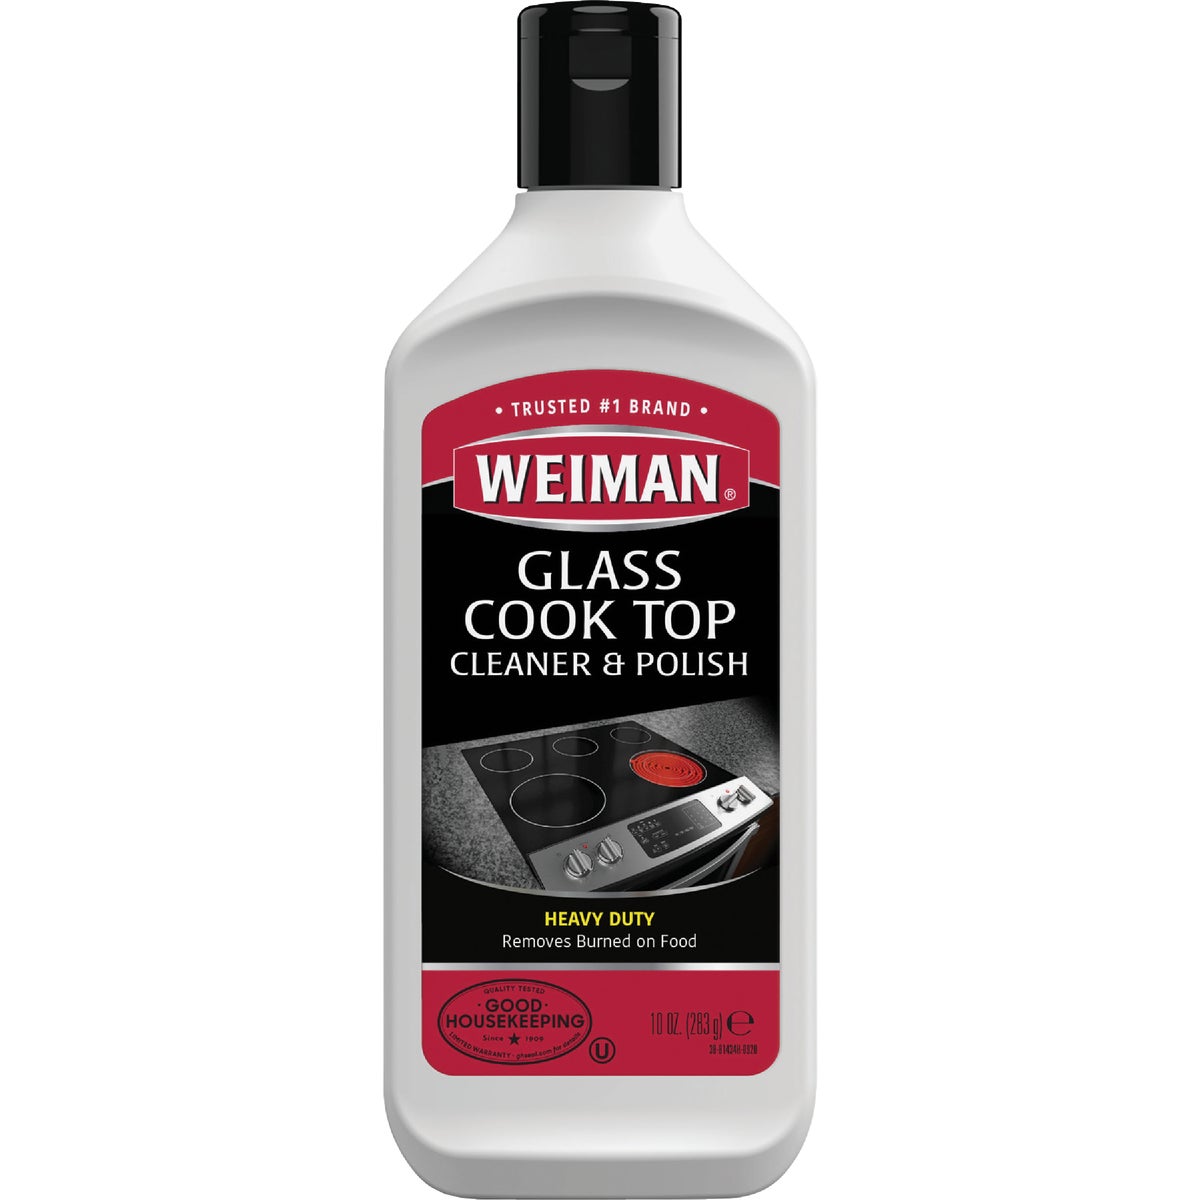 Item 609924, Cleans, shines, and protects glass cook top ranges.